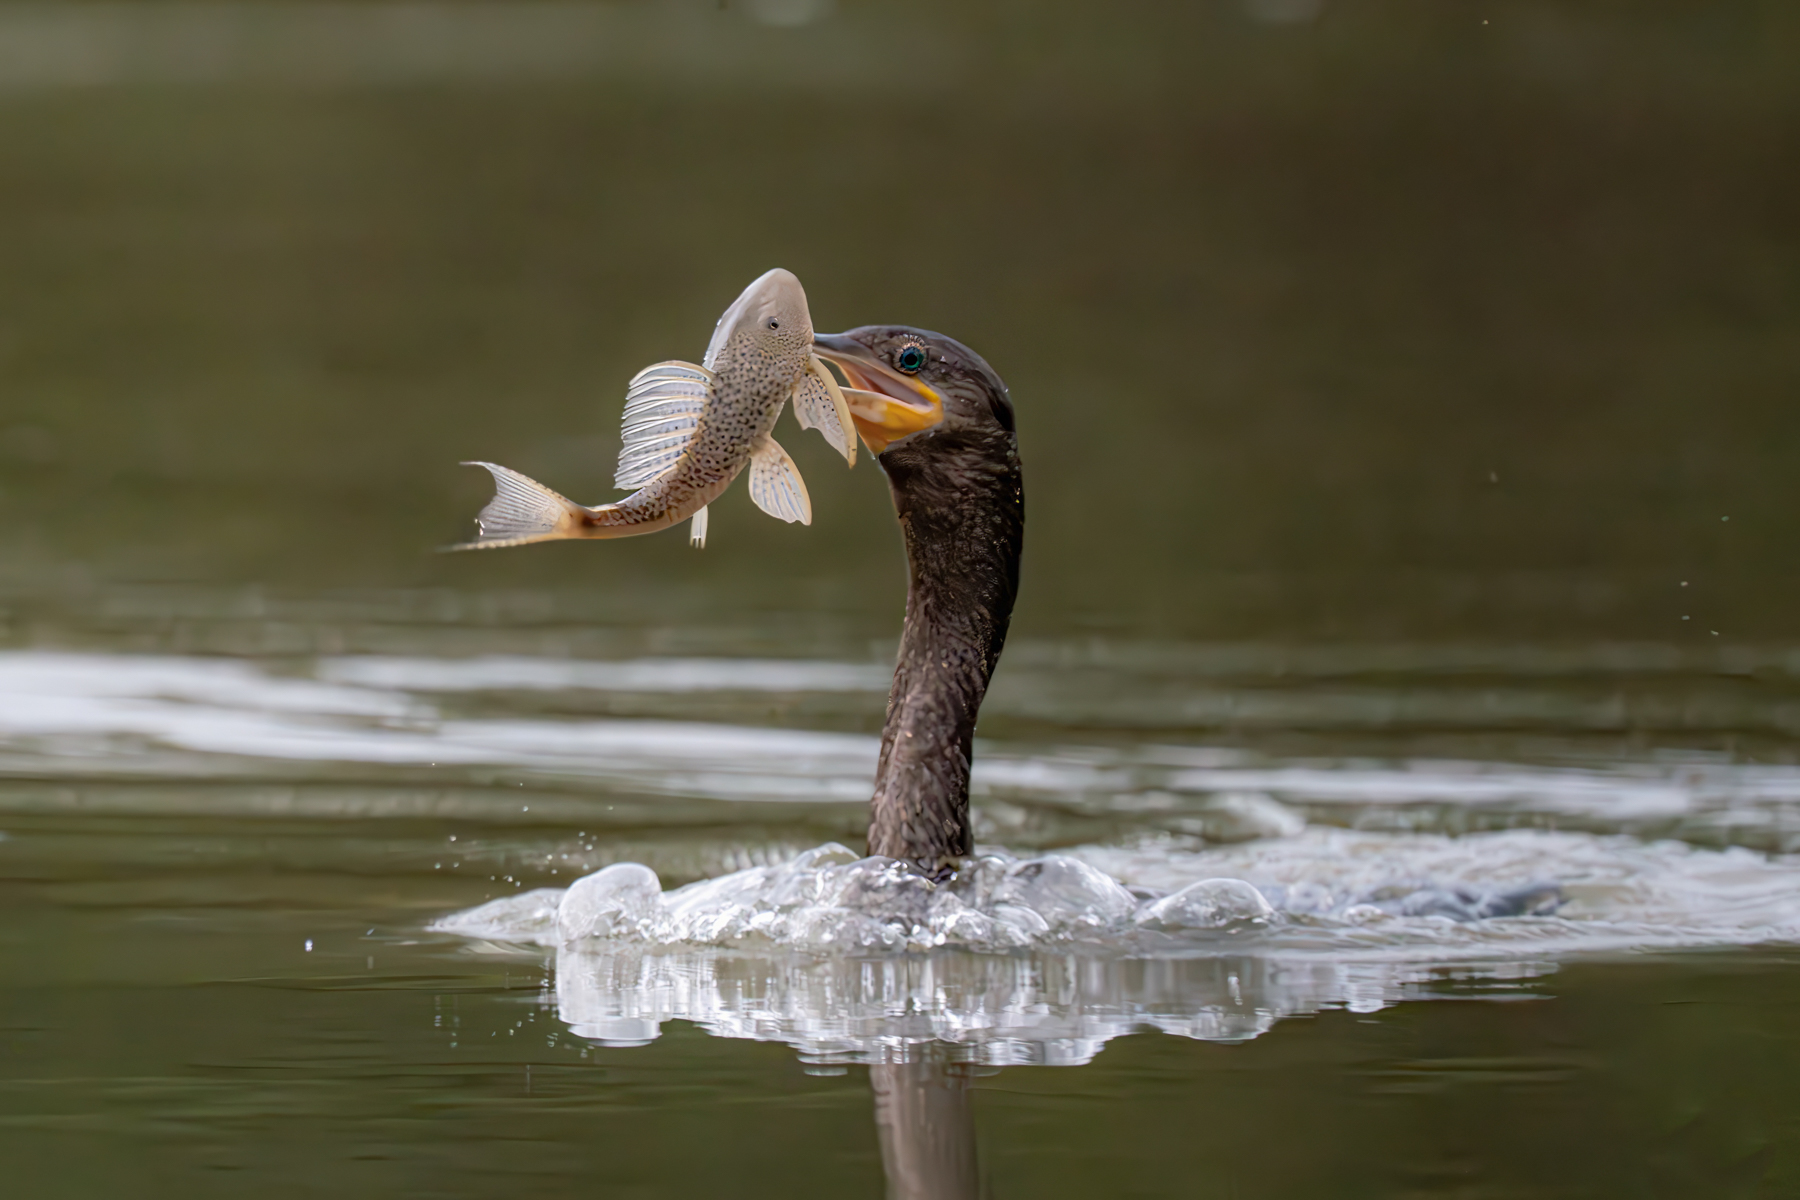 A Neotropic Cormorant tussles with its dinner of Tchupapiela in Cano Negro (image by Inger Vandyke)